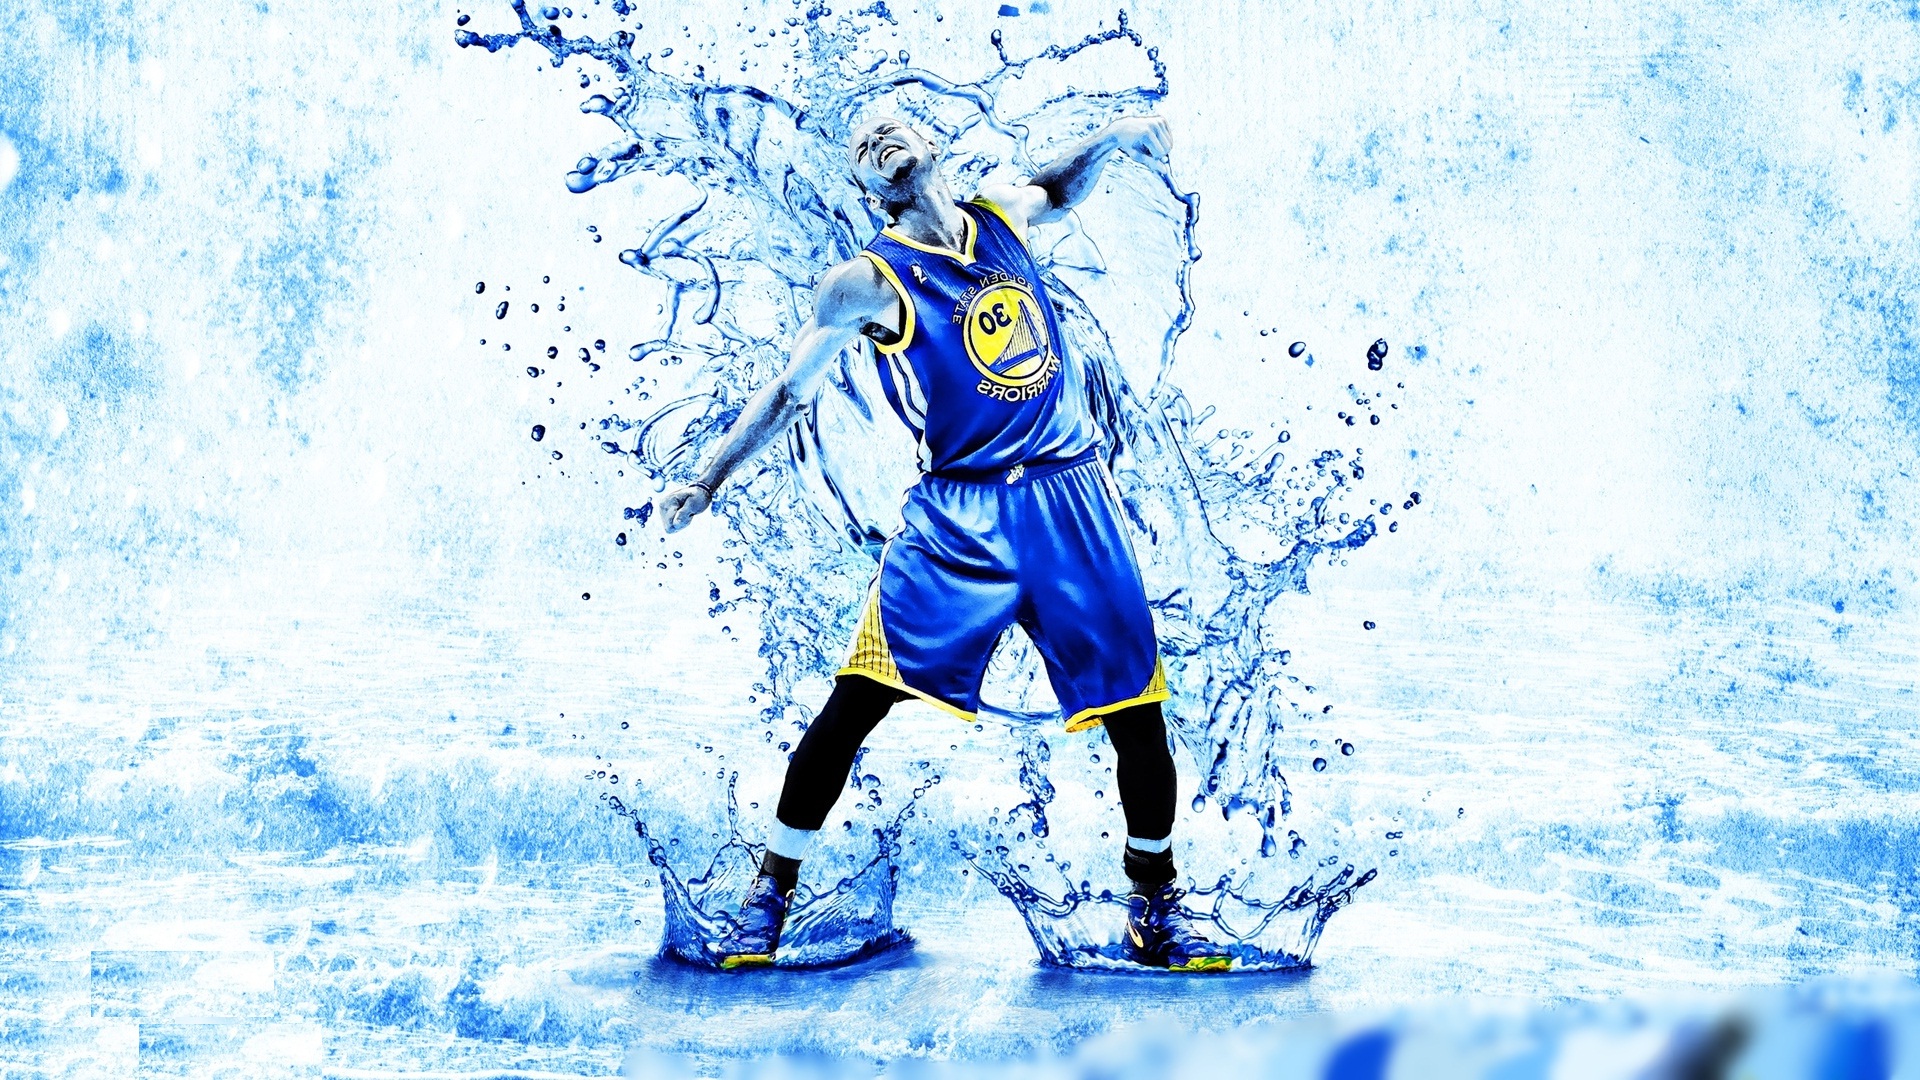 Stephen Curry Wallpaper HD for Basketball Fans 